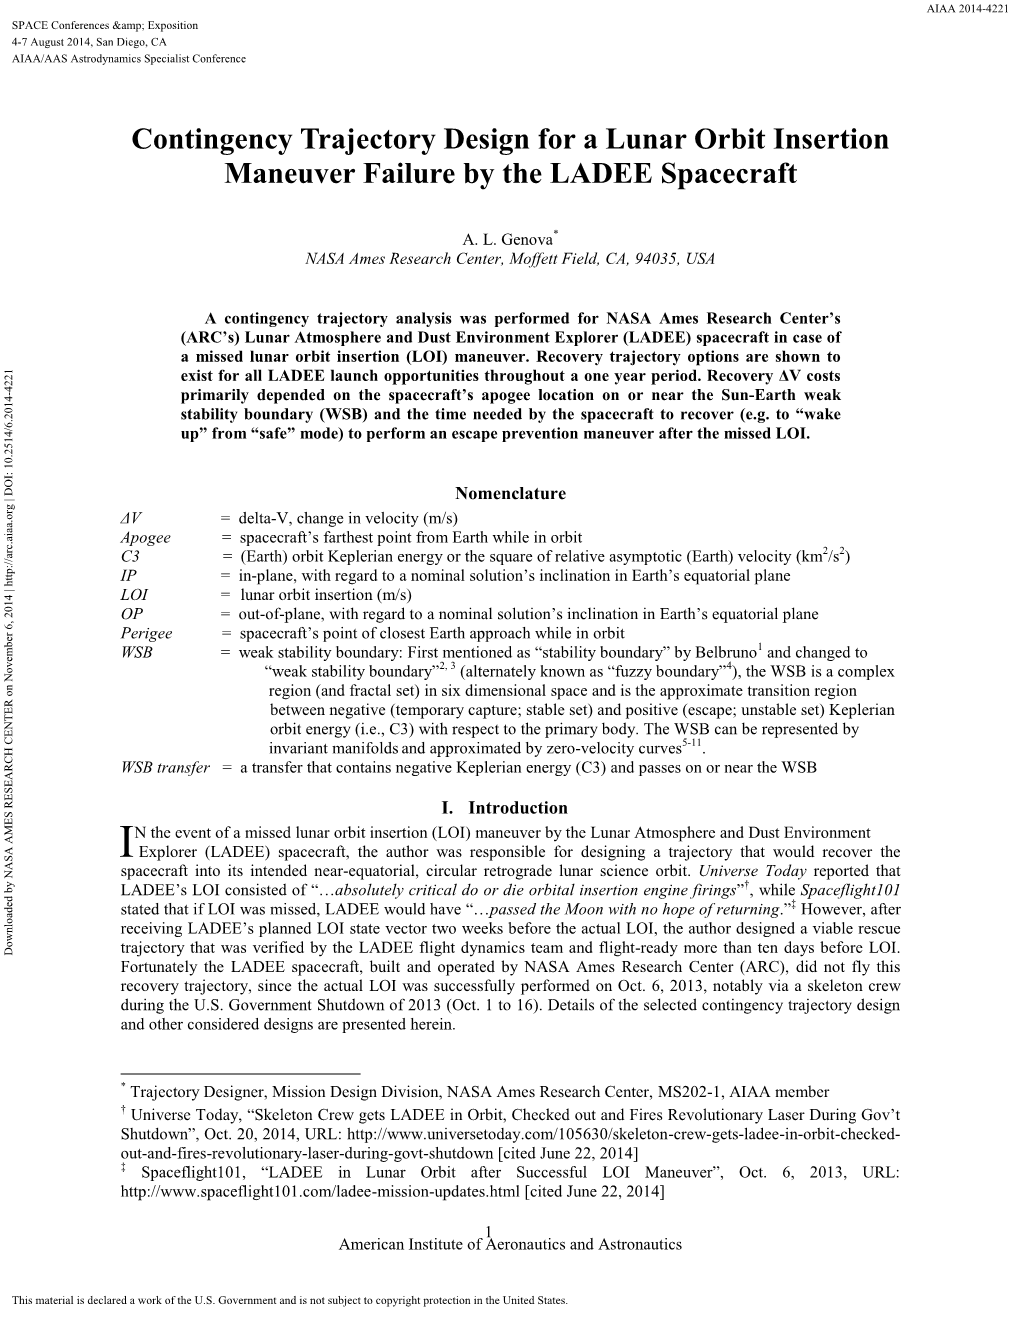 Contingency Trajectory Design for a Lunar Orbit Insertion Maneuver Failure by the LADEE Spacecraft